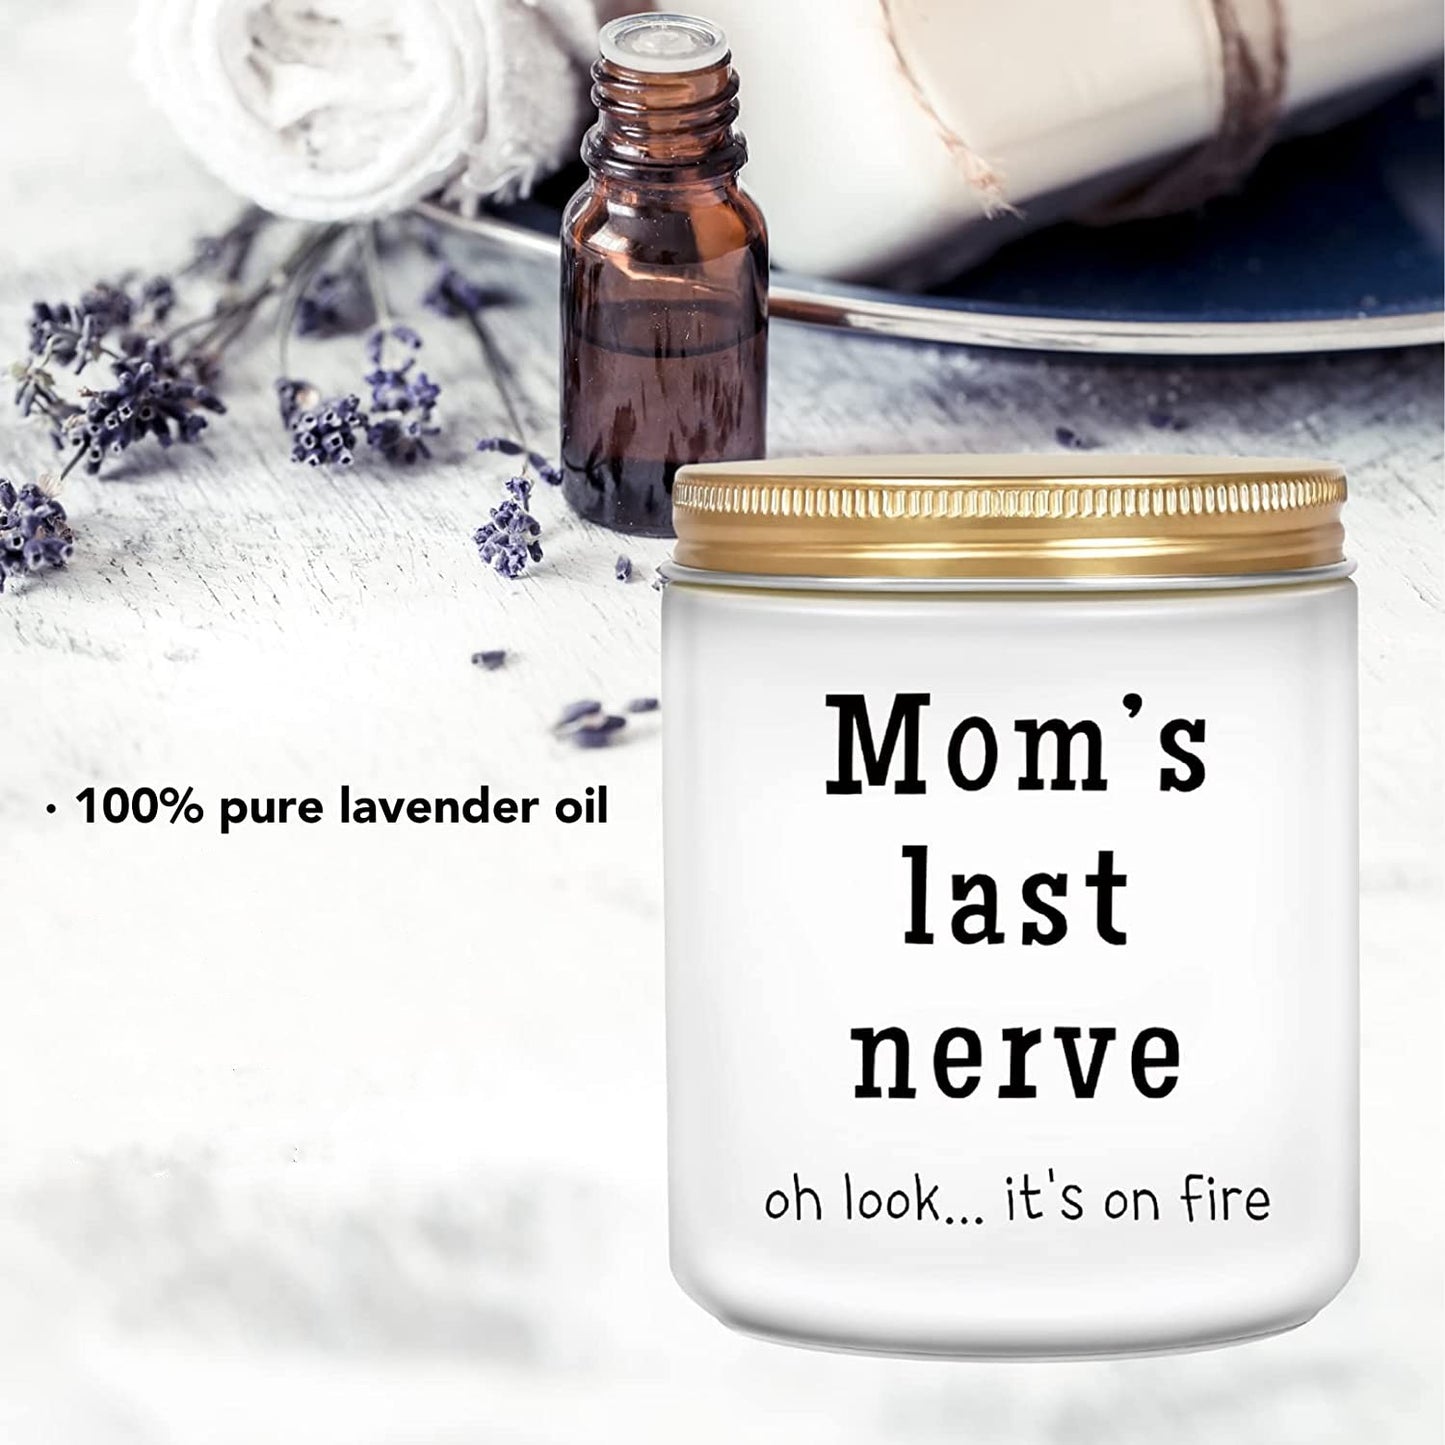 A funny white soy candle in a jar which says, 'Mom's last nerve, oh look... its on fire.' There is also a small brown bottle with text that says, '100% pure lavender oil.'